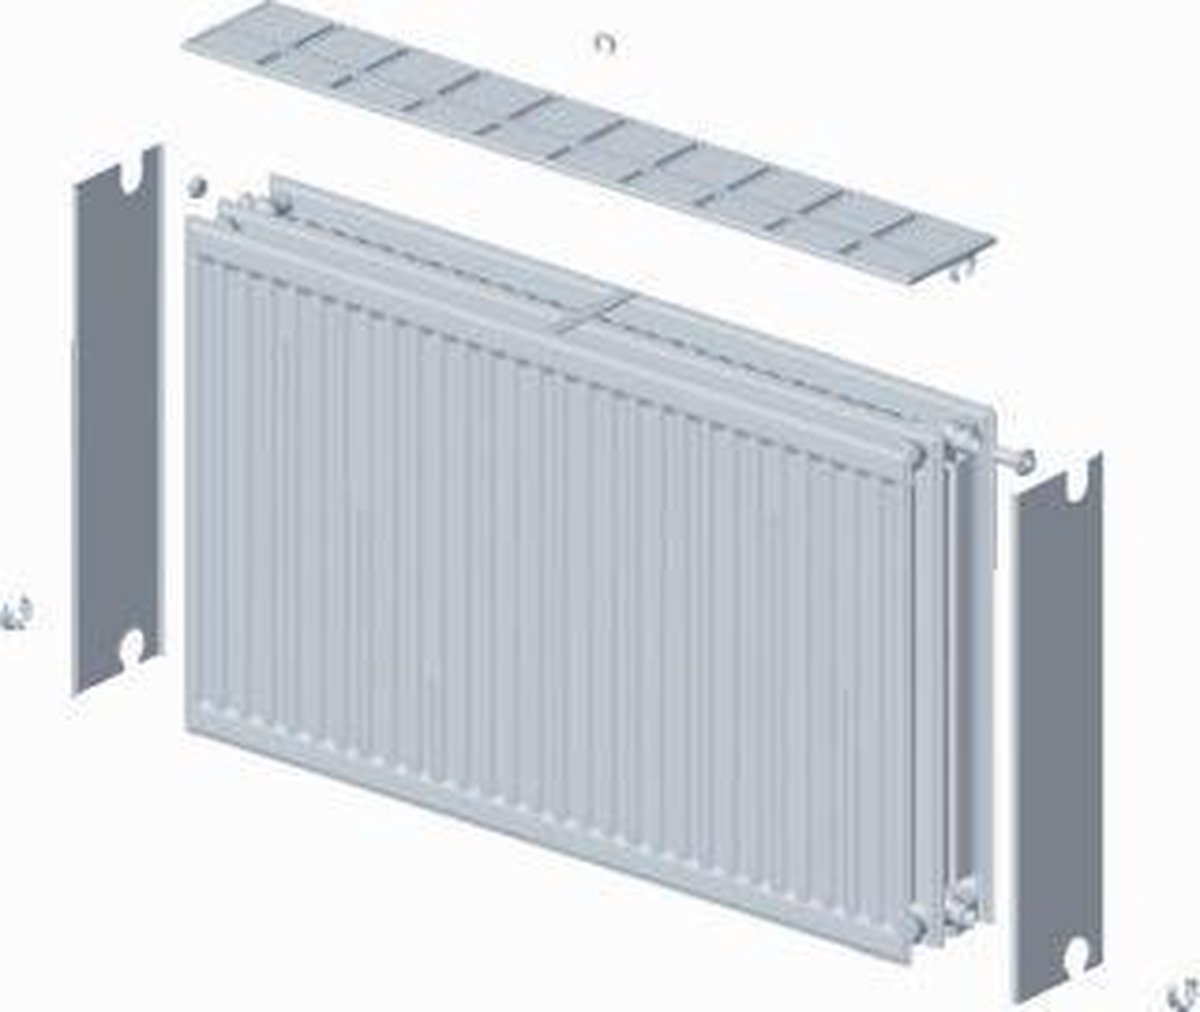 Stelrad paneelradiator Novello, staal, wit, (hxlxd) 300x2000x158mm, 33